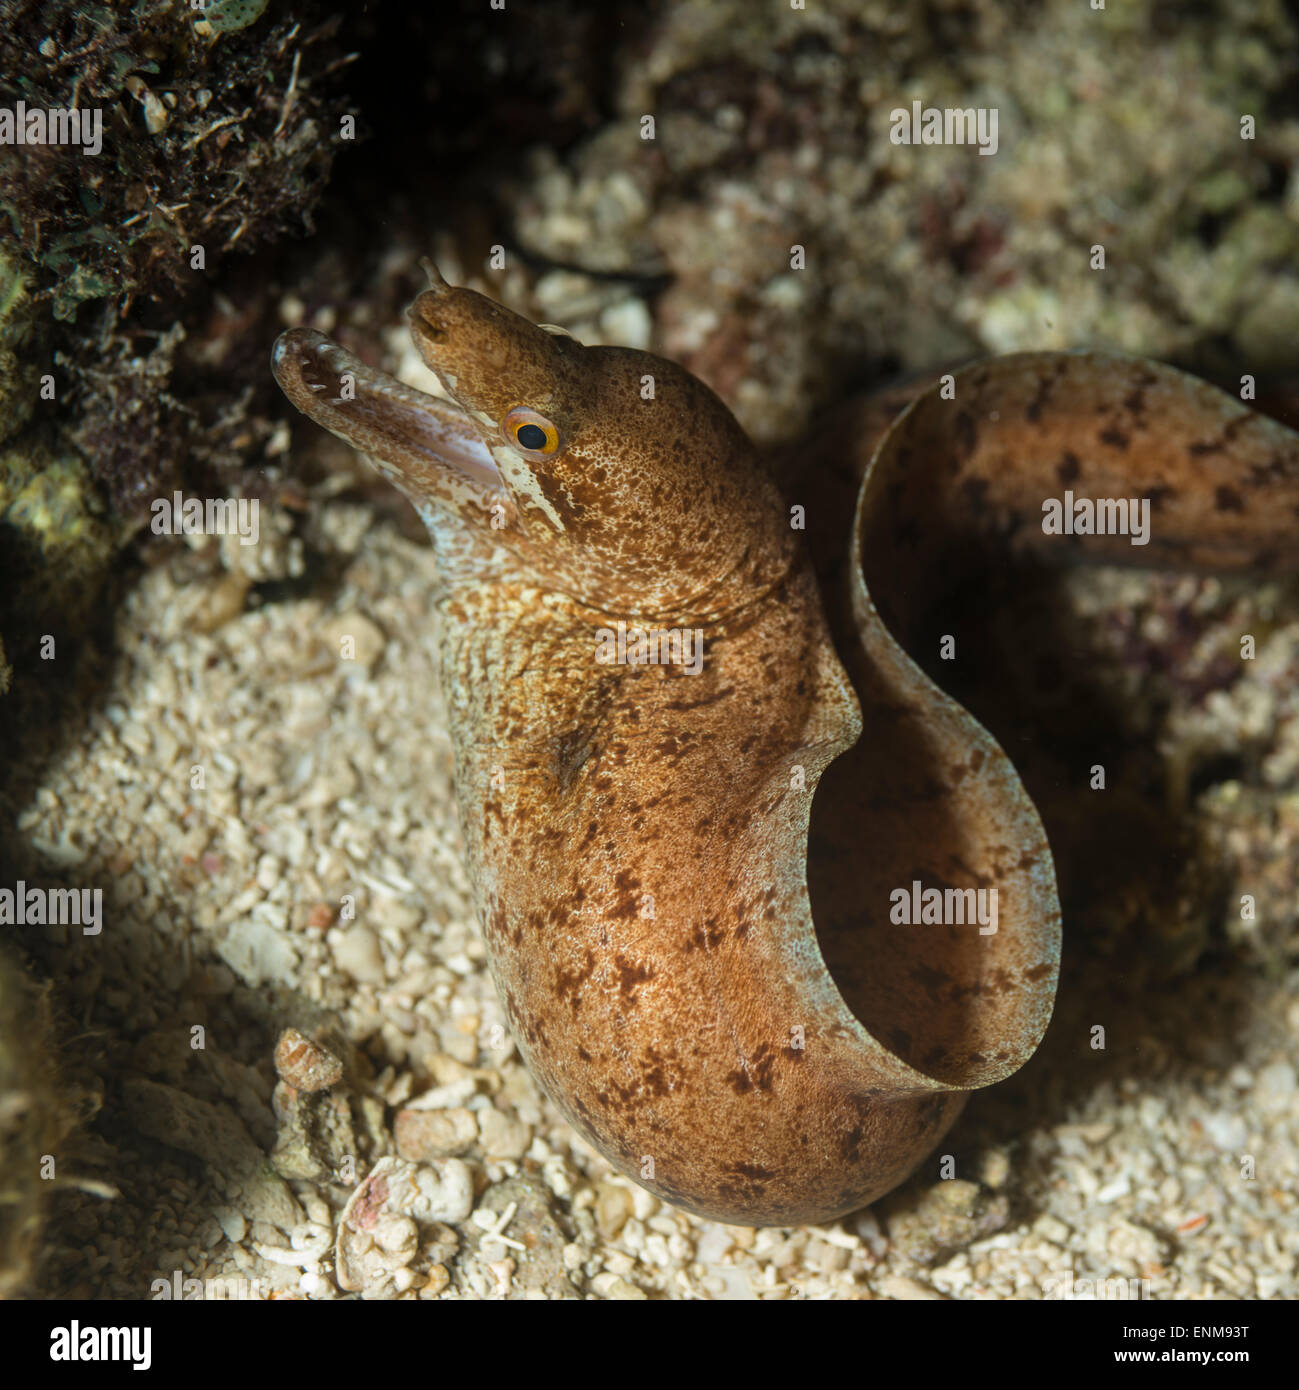 Agitated fangtooth moray eel captured out of hiding by surprise at night Stock Photo